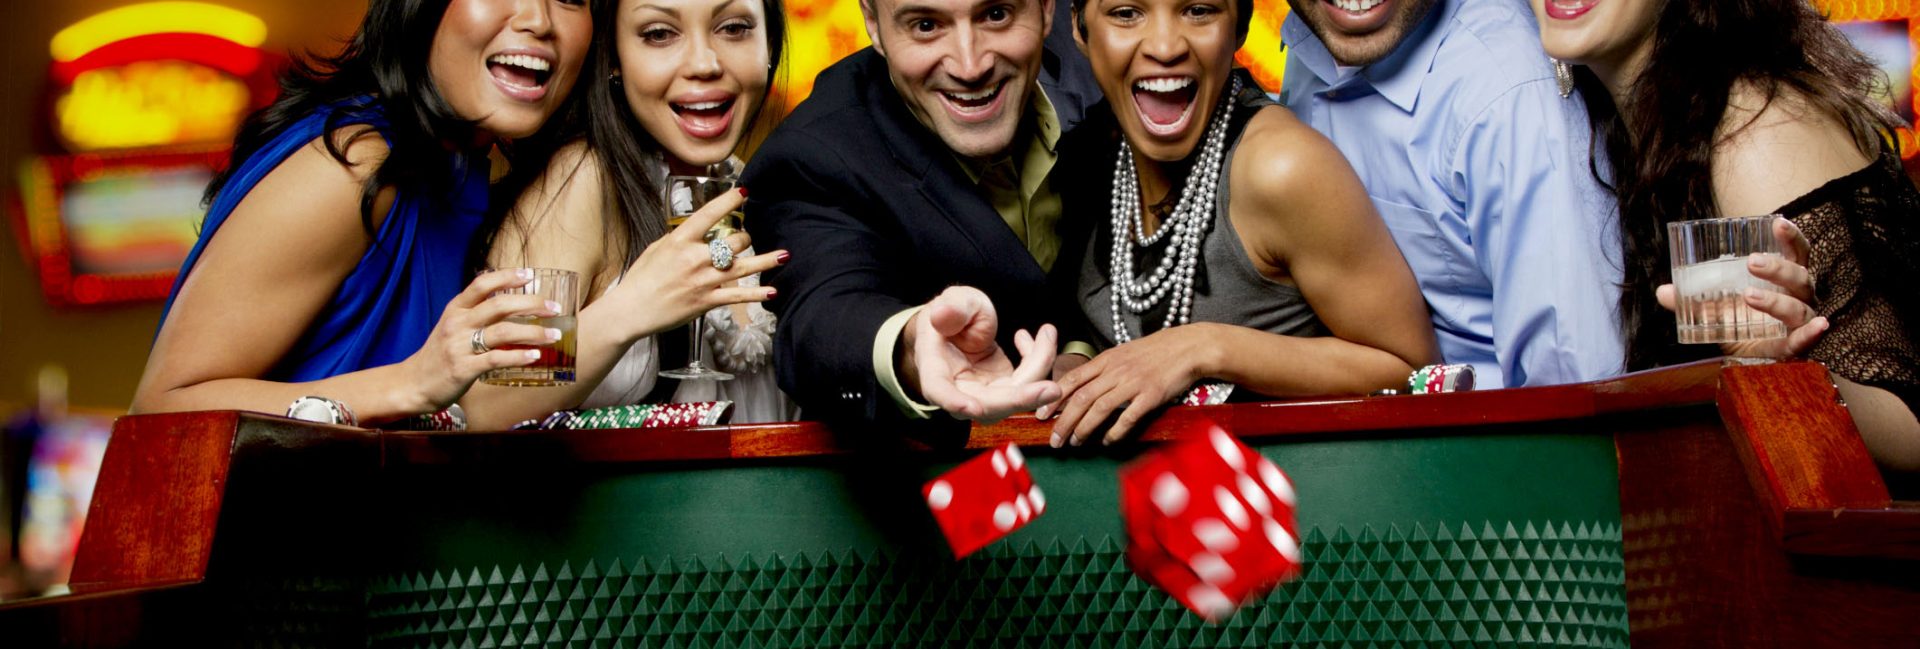 No Buy-Ins, All Wins: Your Guide to Free Online Poker Success